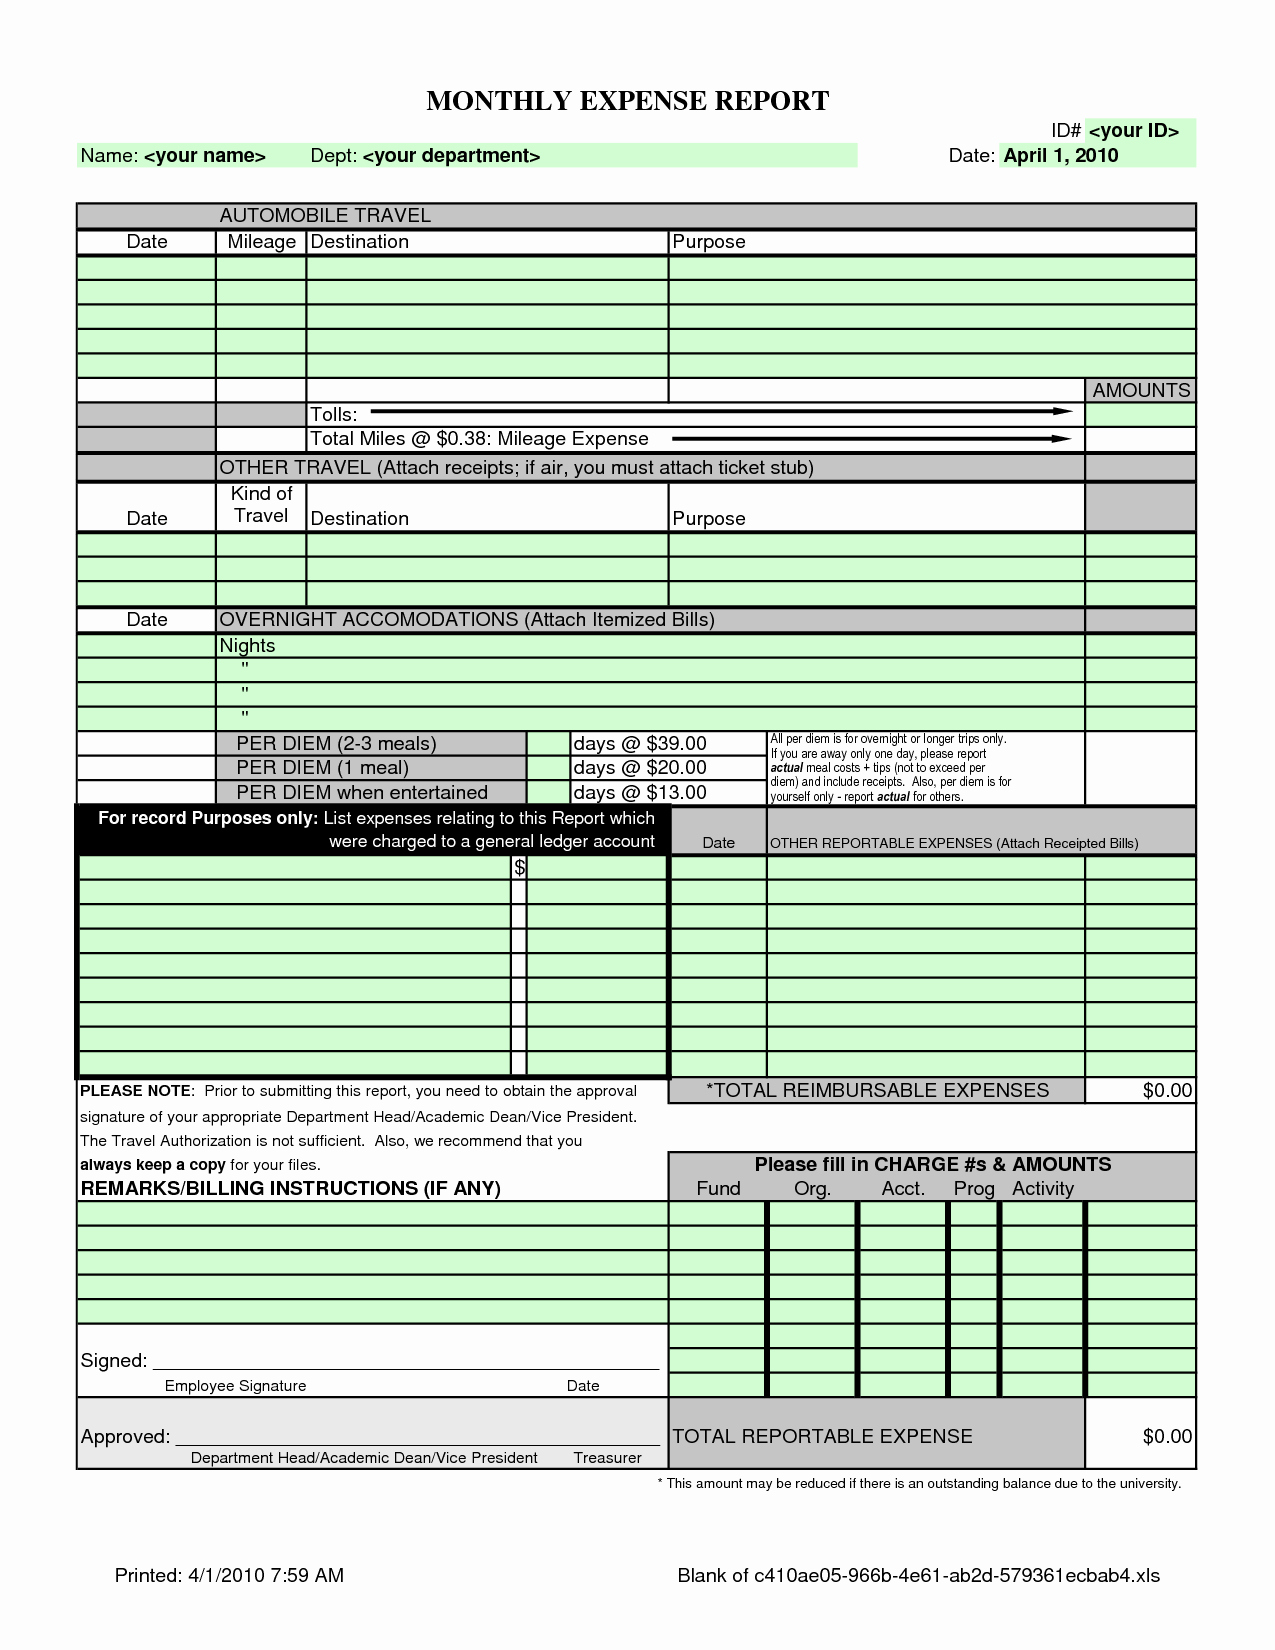 Basic Expense Report Template Elegant Monthly Expense Report Template